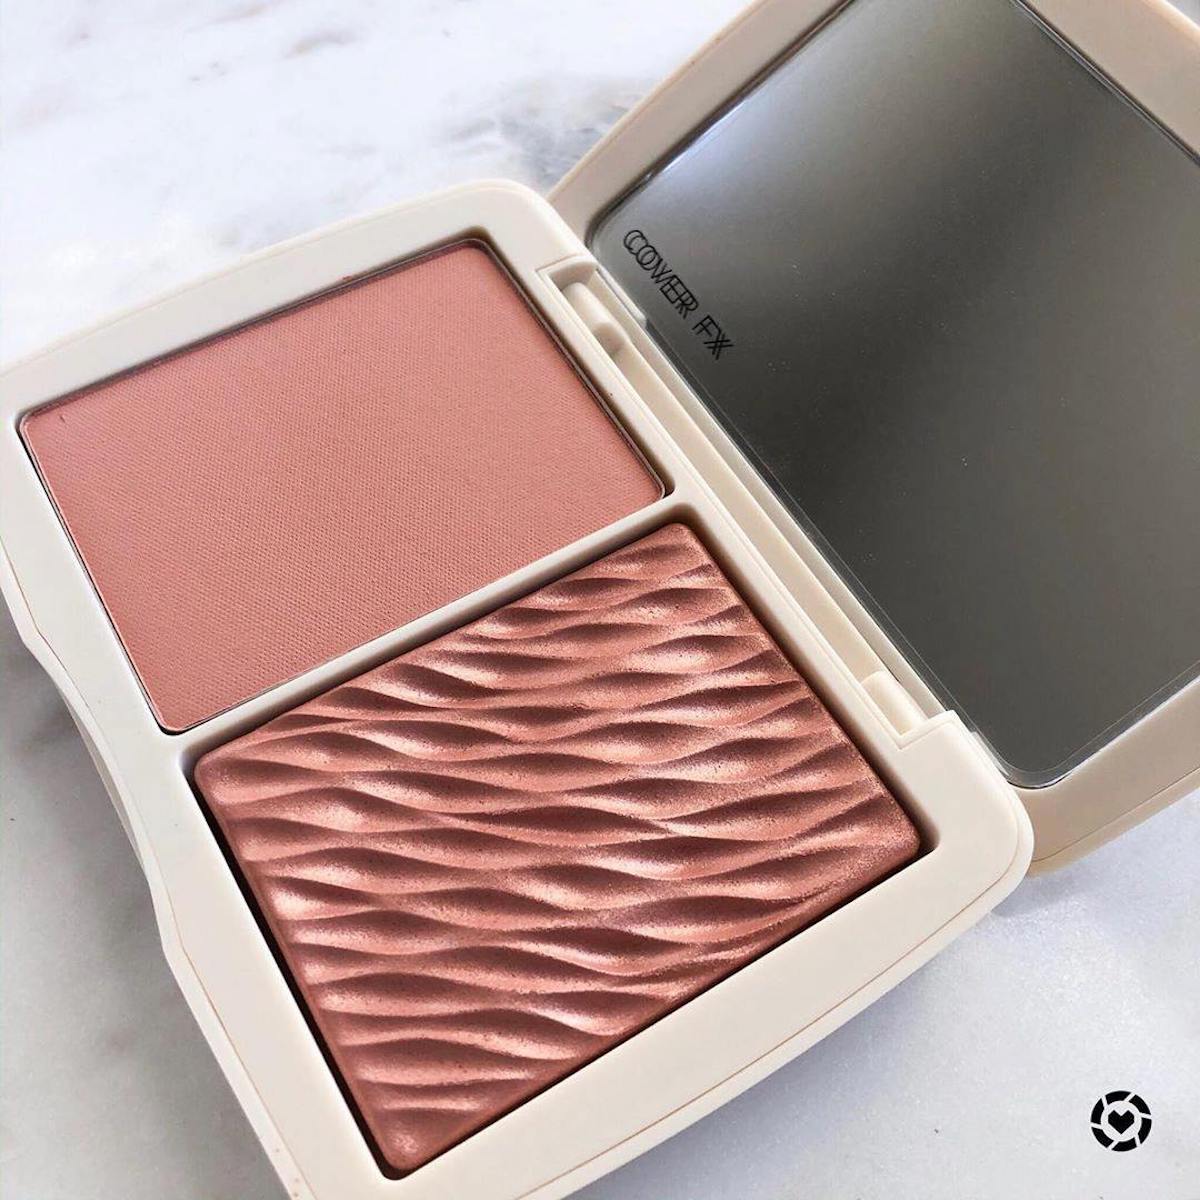 open case of cover fx blush duo